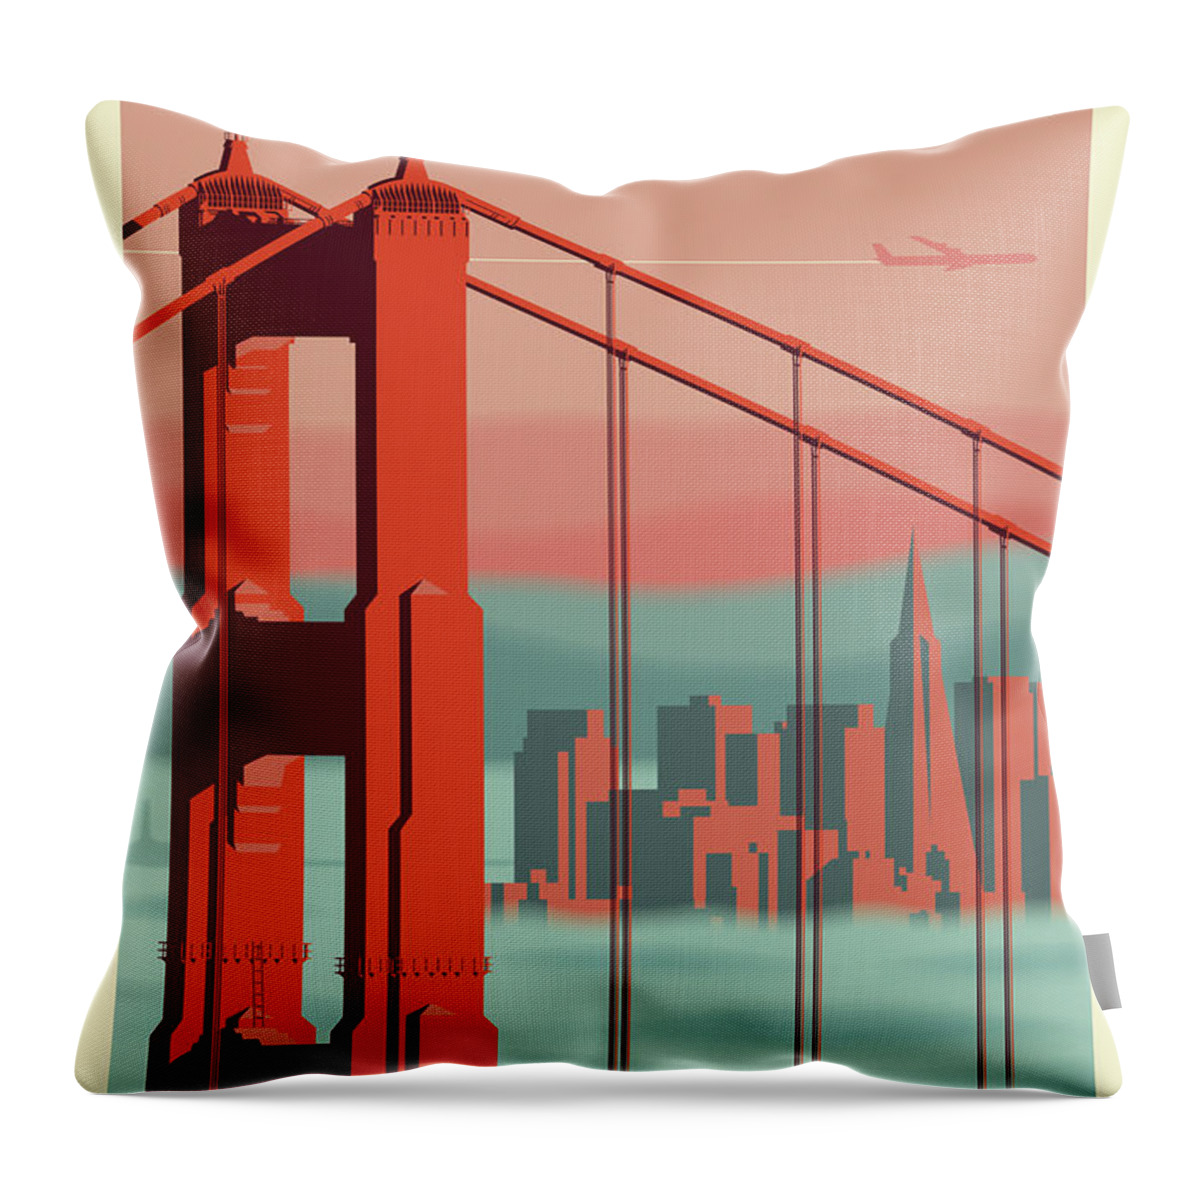 Travel Poster Throw Pillow featuring the digital art San Francisco Poster - Vintage Travel by Jim Zahniser